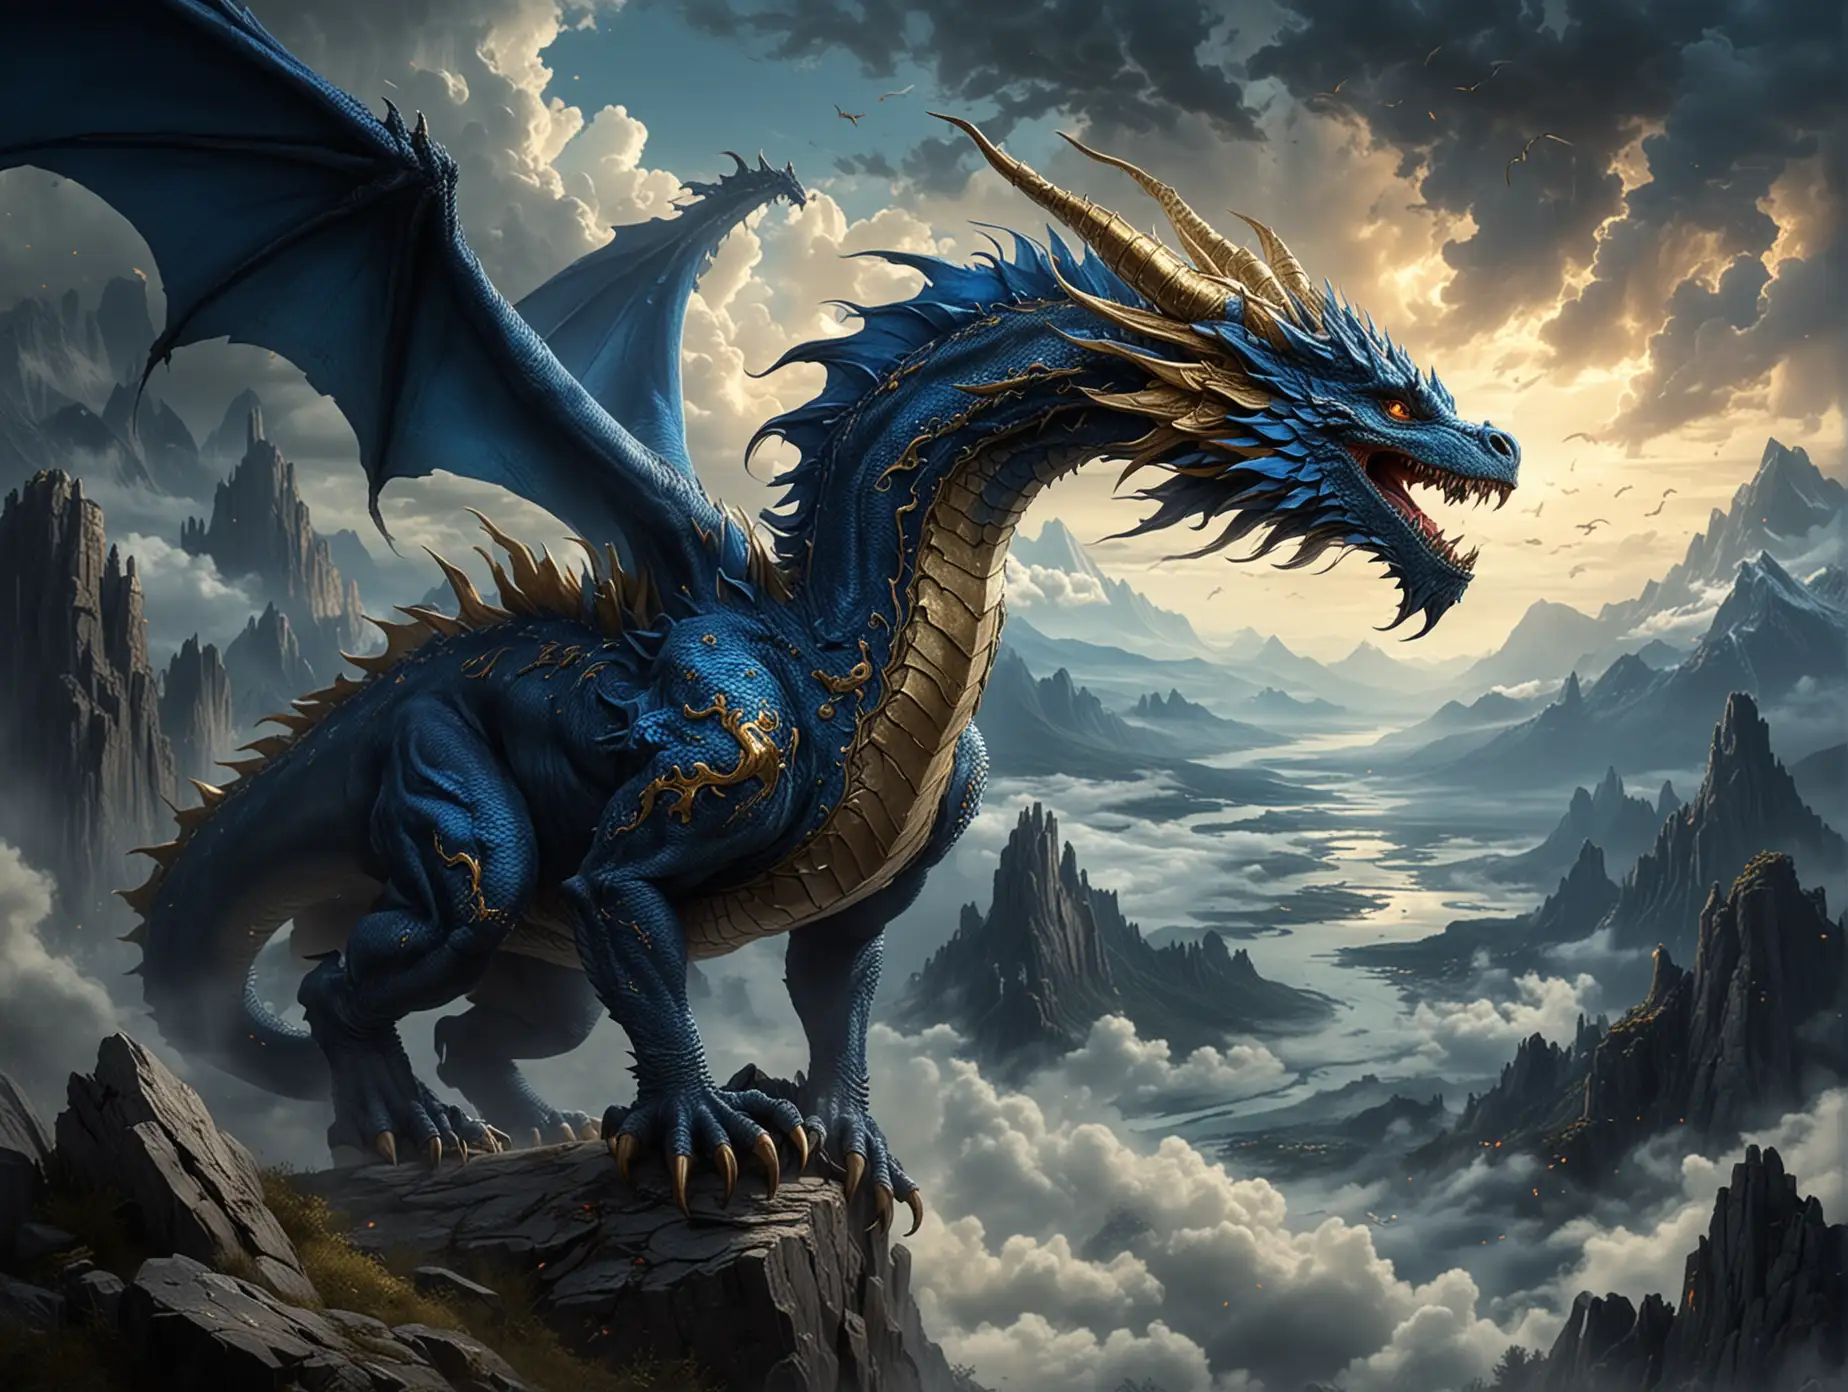 Majestic-Blue-Dragon-with-Gold-Adornments-in-Cloudy-Mountain-Landscape